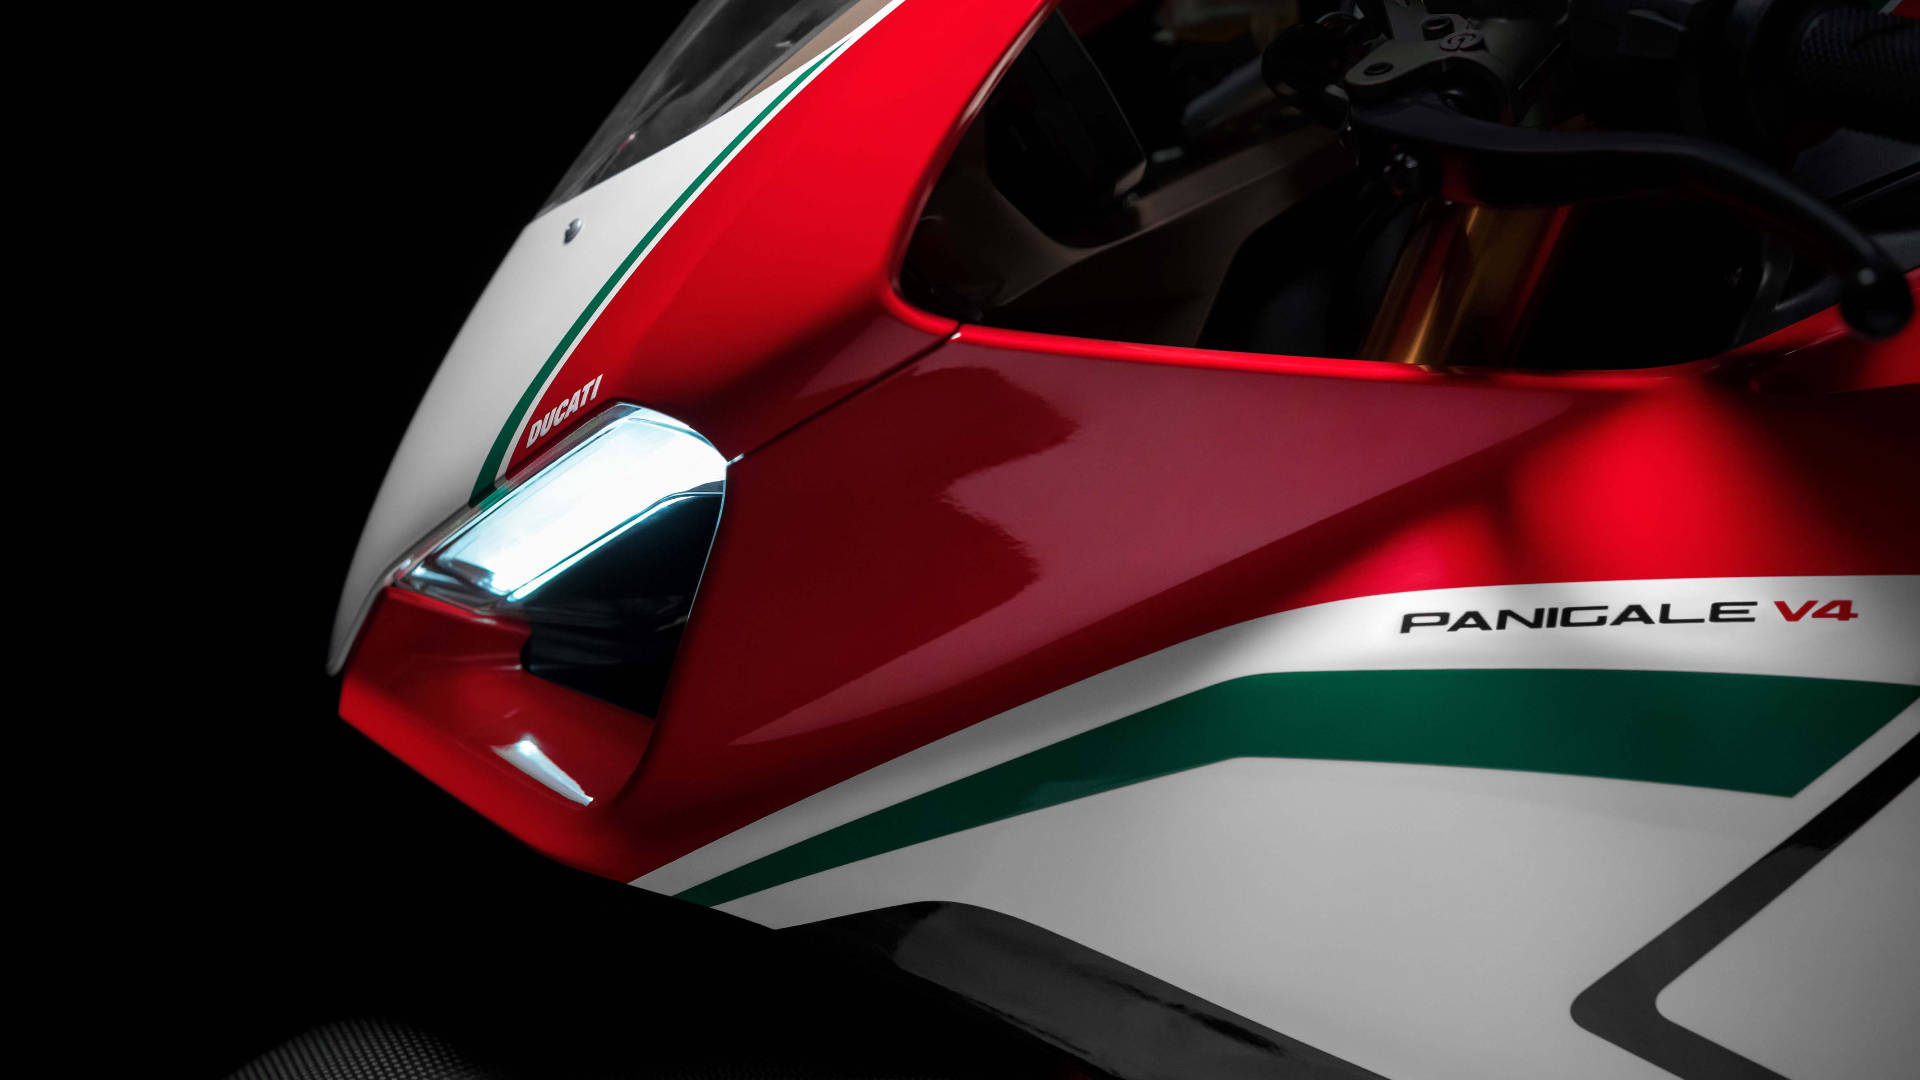 The Legendary Ducati Panigale V4 Speciale Background